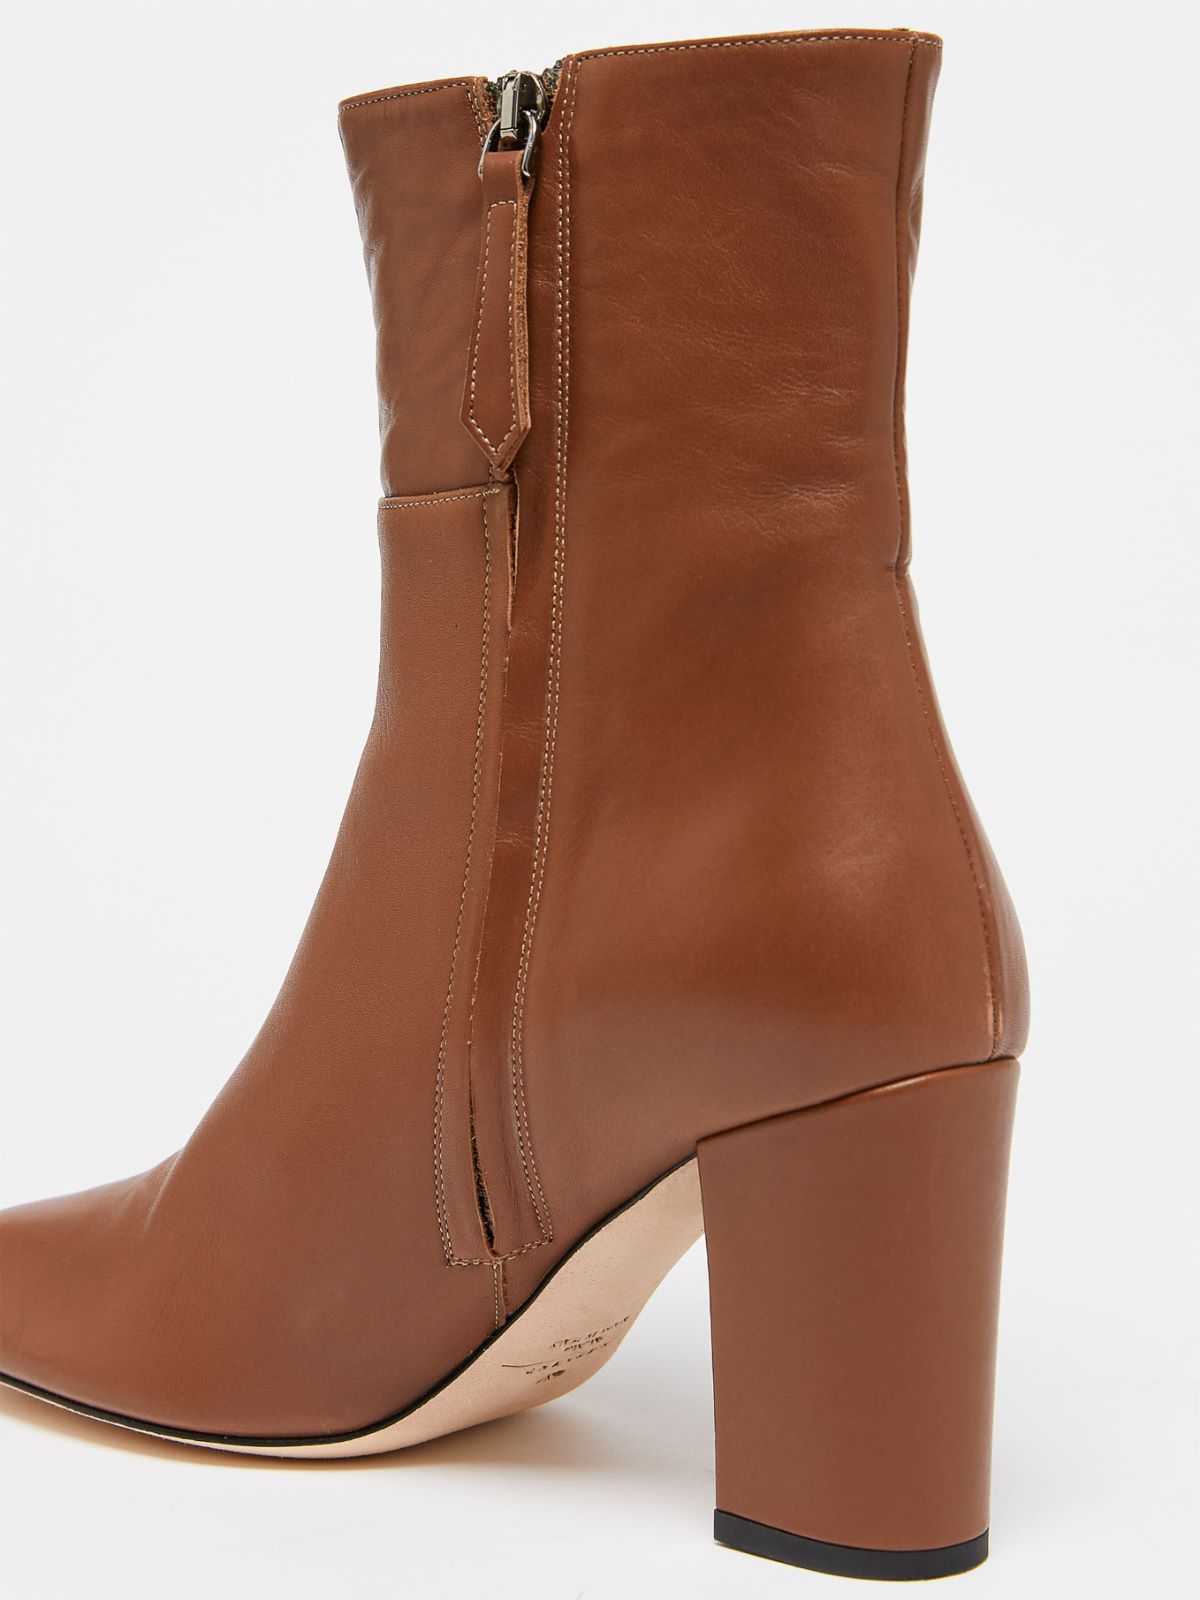 Leather ankle boots - TOBACCO - Weekend Max Mara - 4